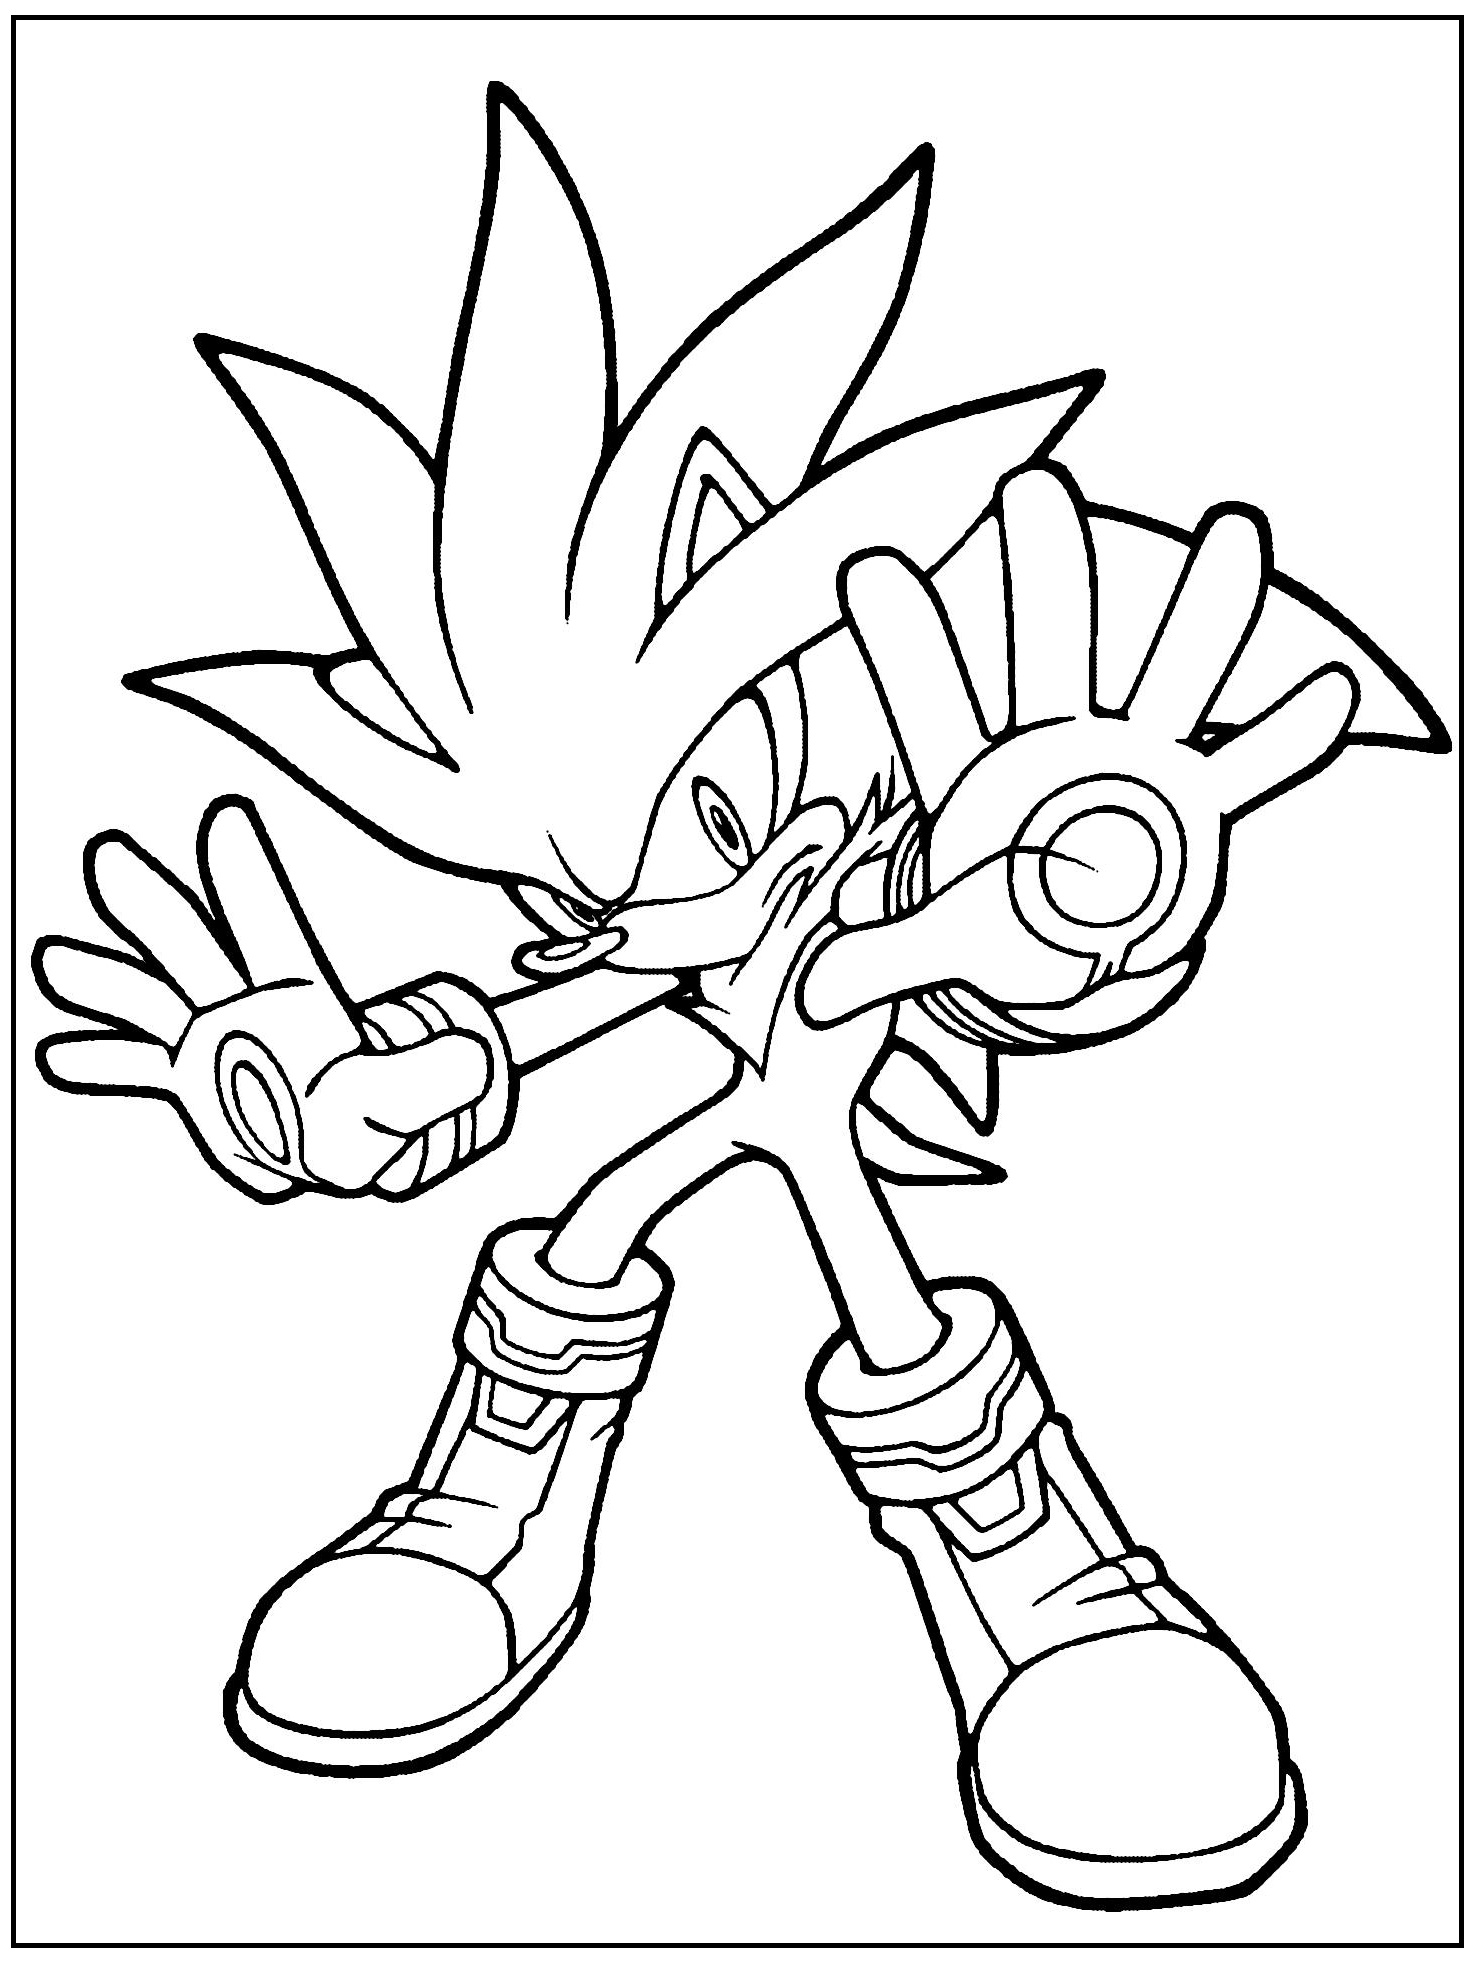 Super Shadow Coloring Pages at Free printable